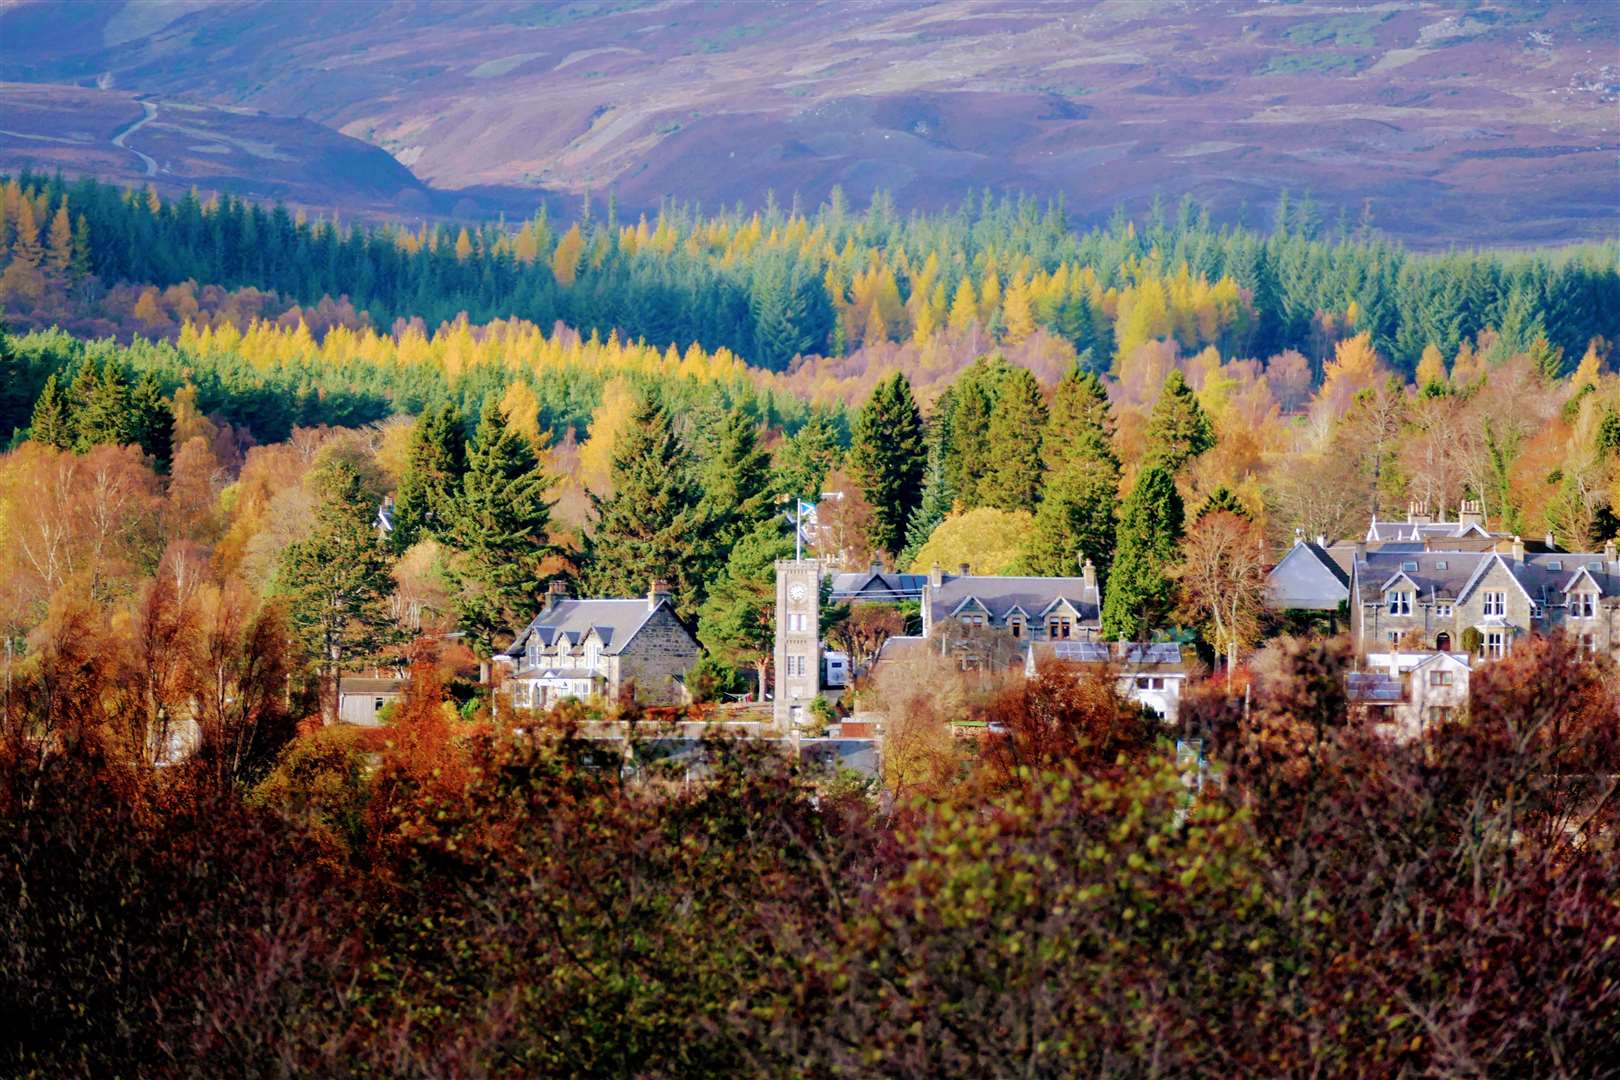 Kingussie is a stunning place to visit in Autumn but a very long drive from Lancashire for just a coronavirus test.